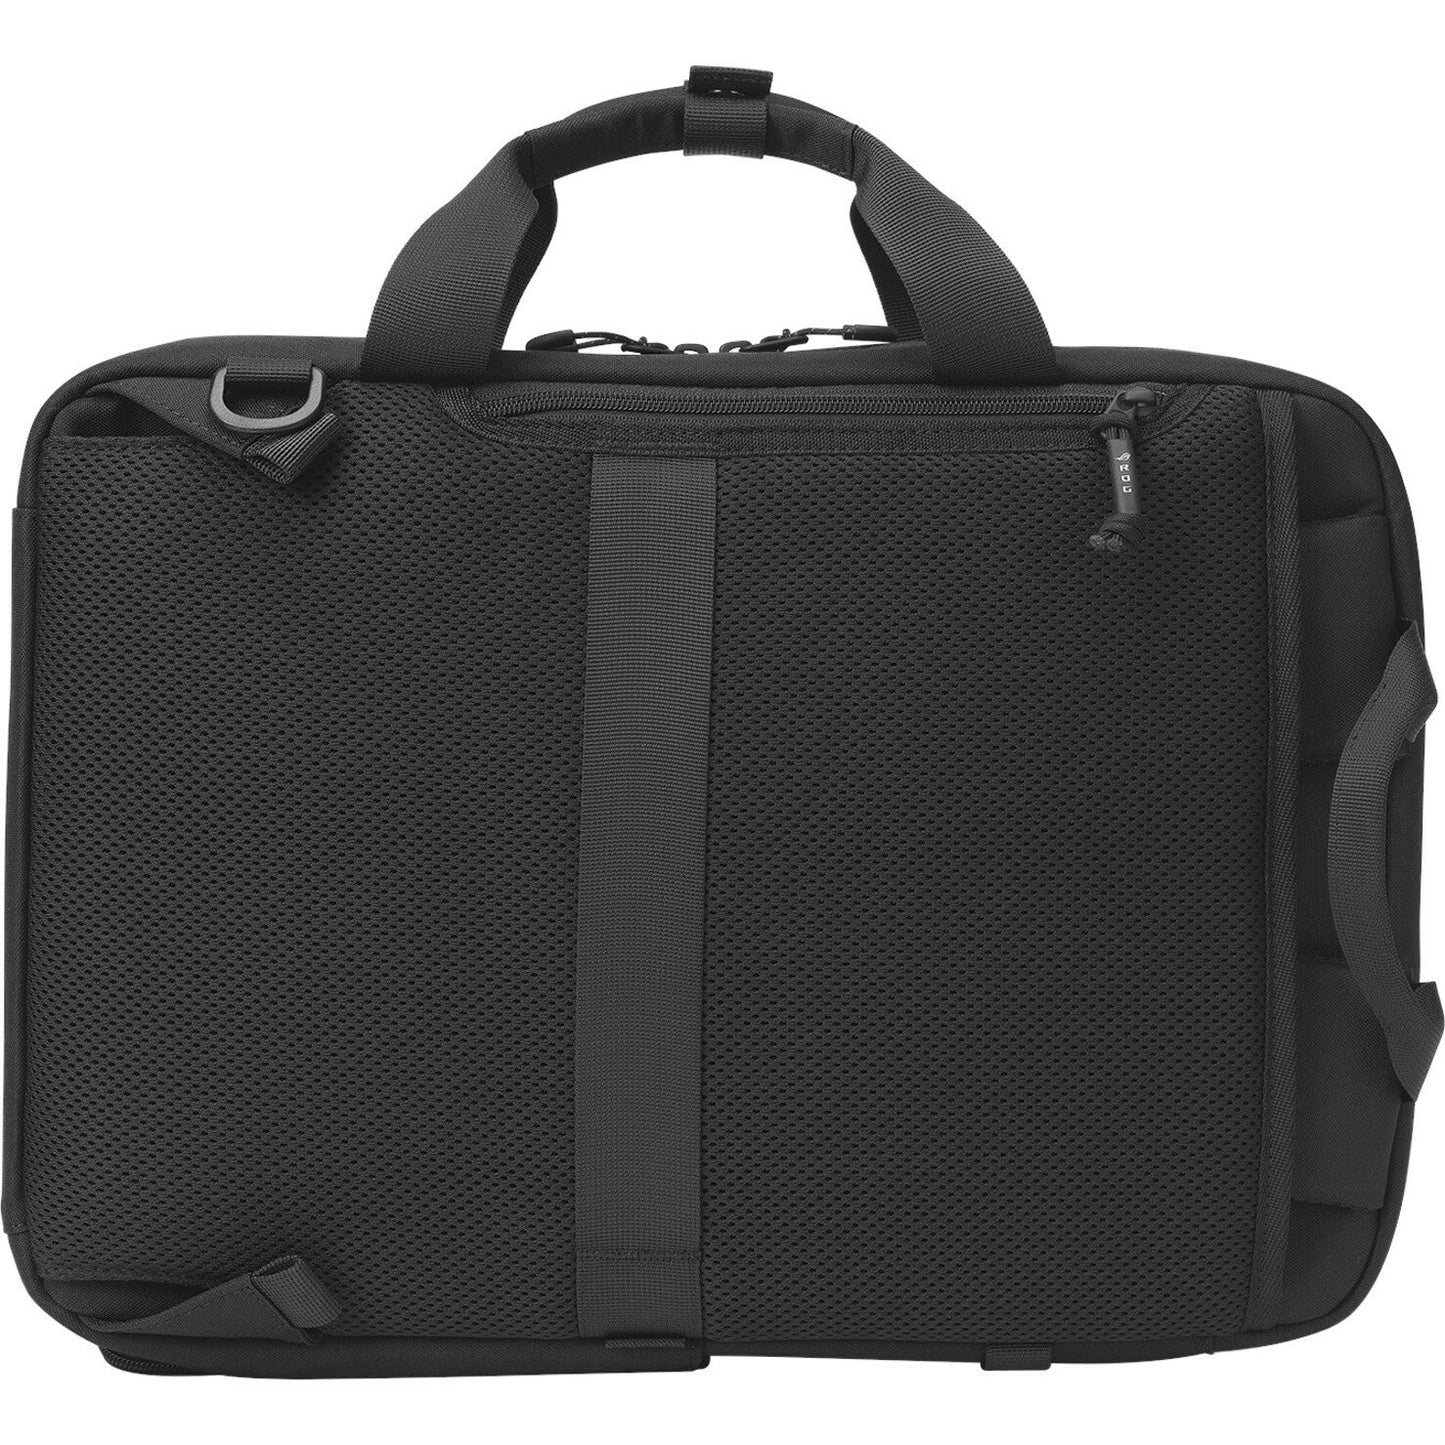 Asus ROG Archer Carrying Case (Backpack/Briefcase) for 11" to 15.6" Asus Notebook - Black